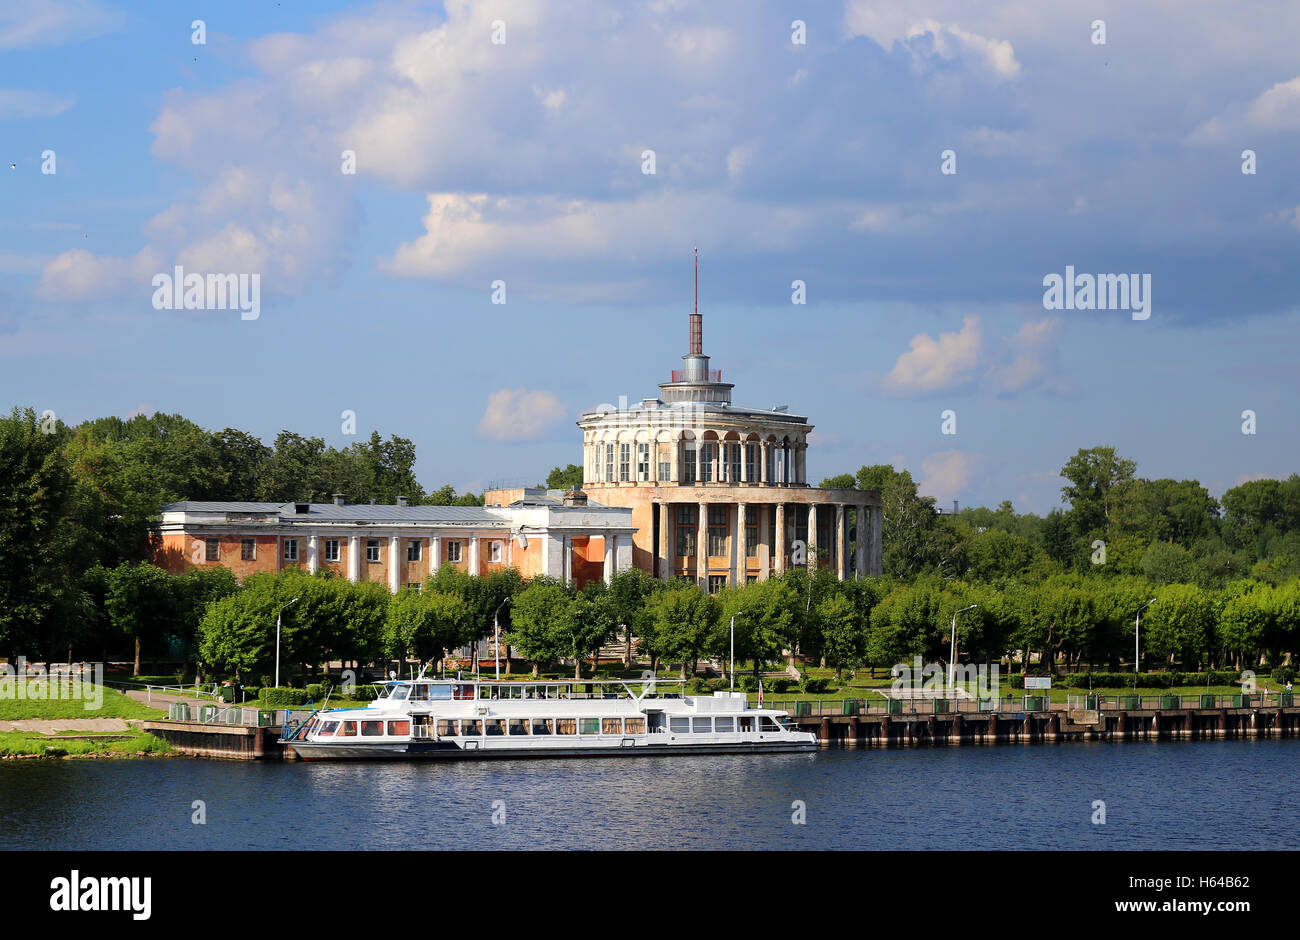 Marine station in Russia in the city of Tver with the boat on the river Volga Stock Photo